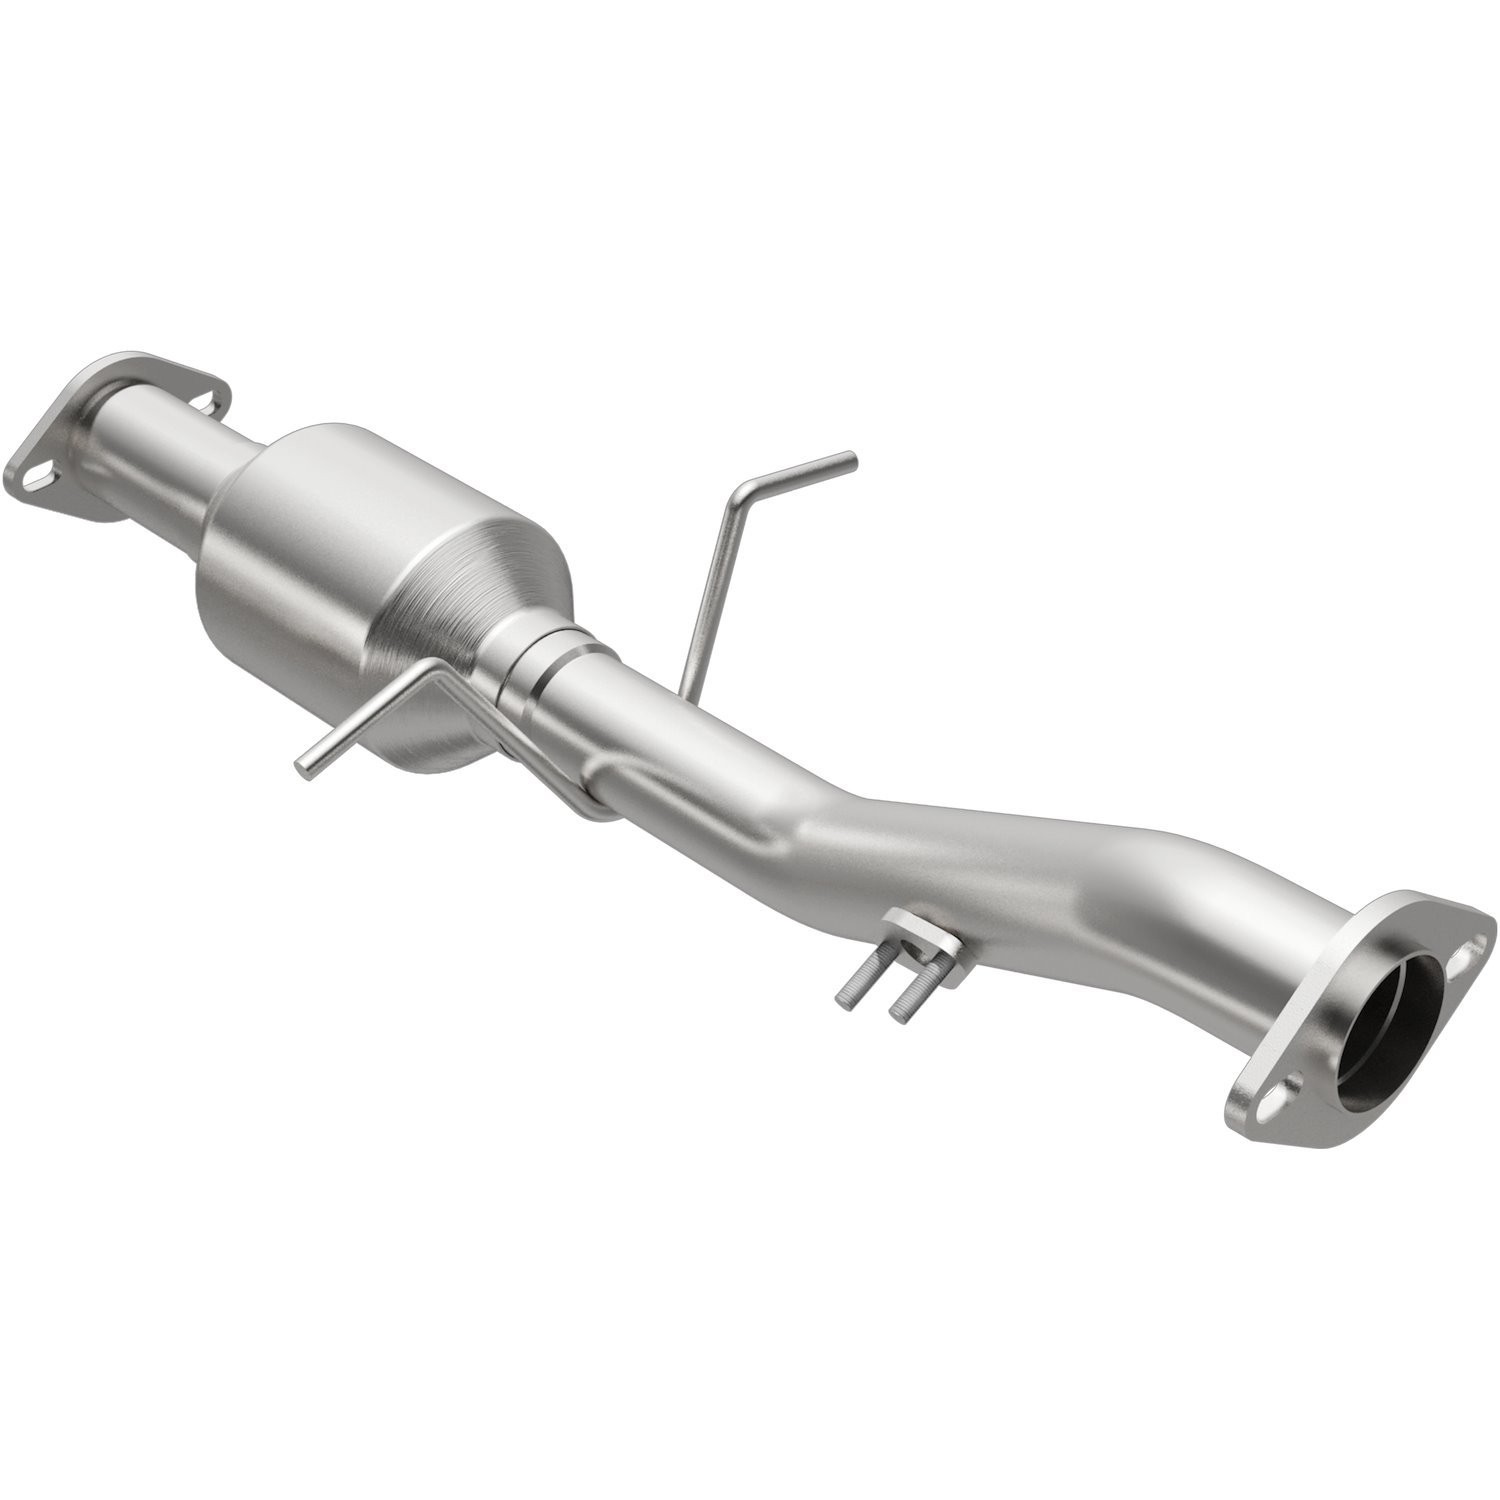 1995-1998 Toyota T100 California Grade CARB Compliant Direct-Fit Catalytic Converter